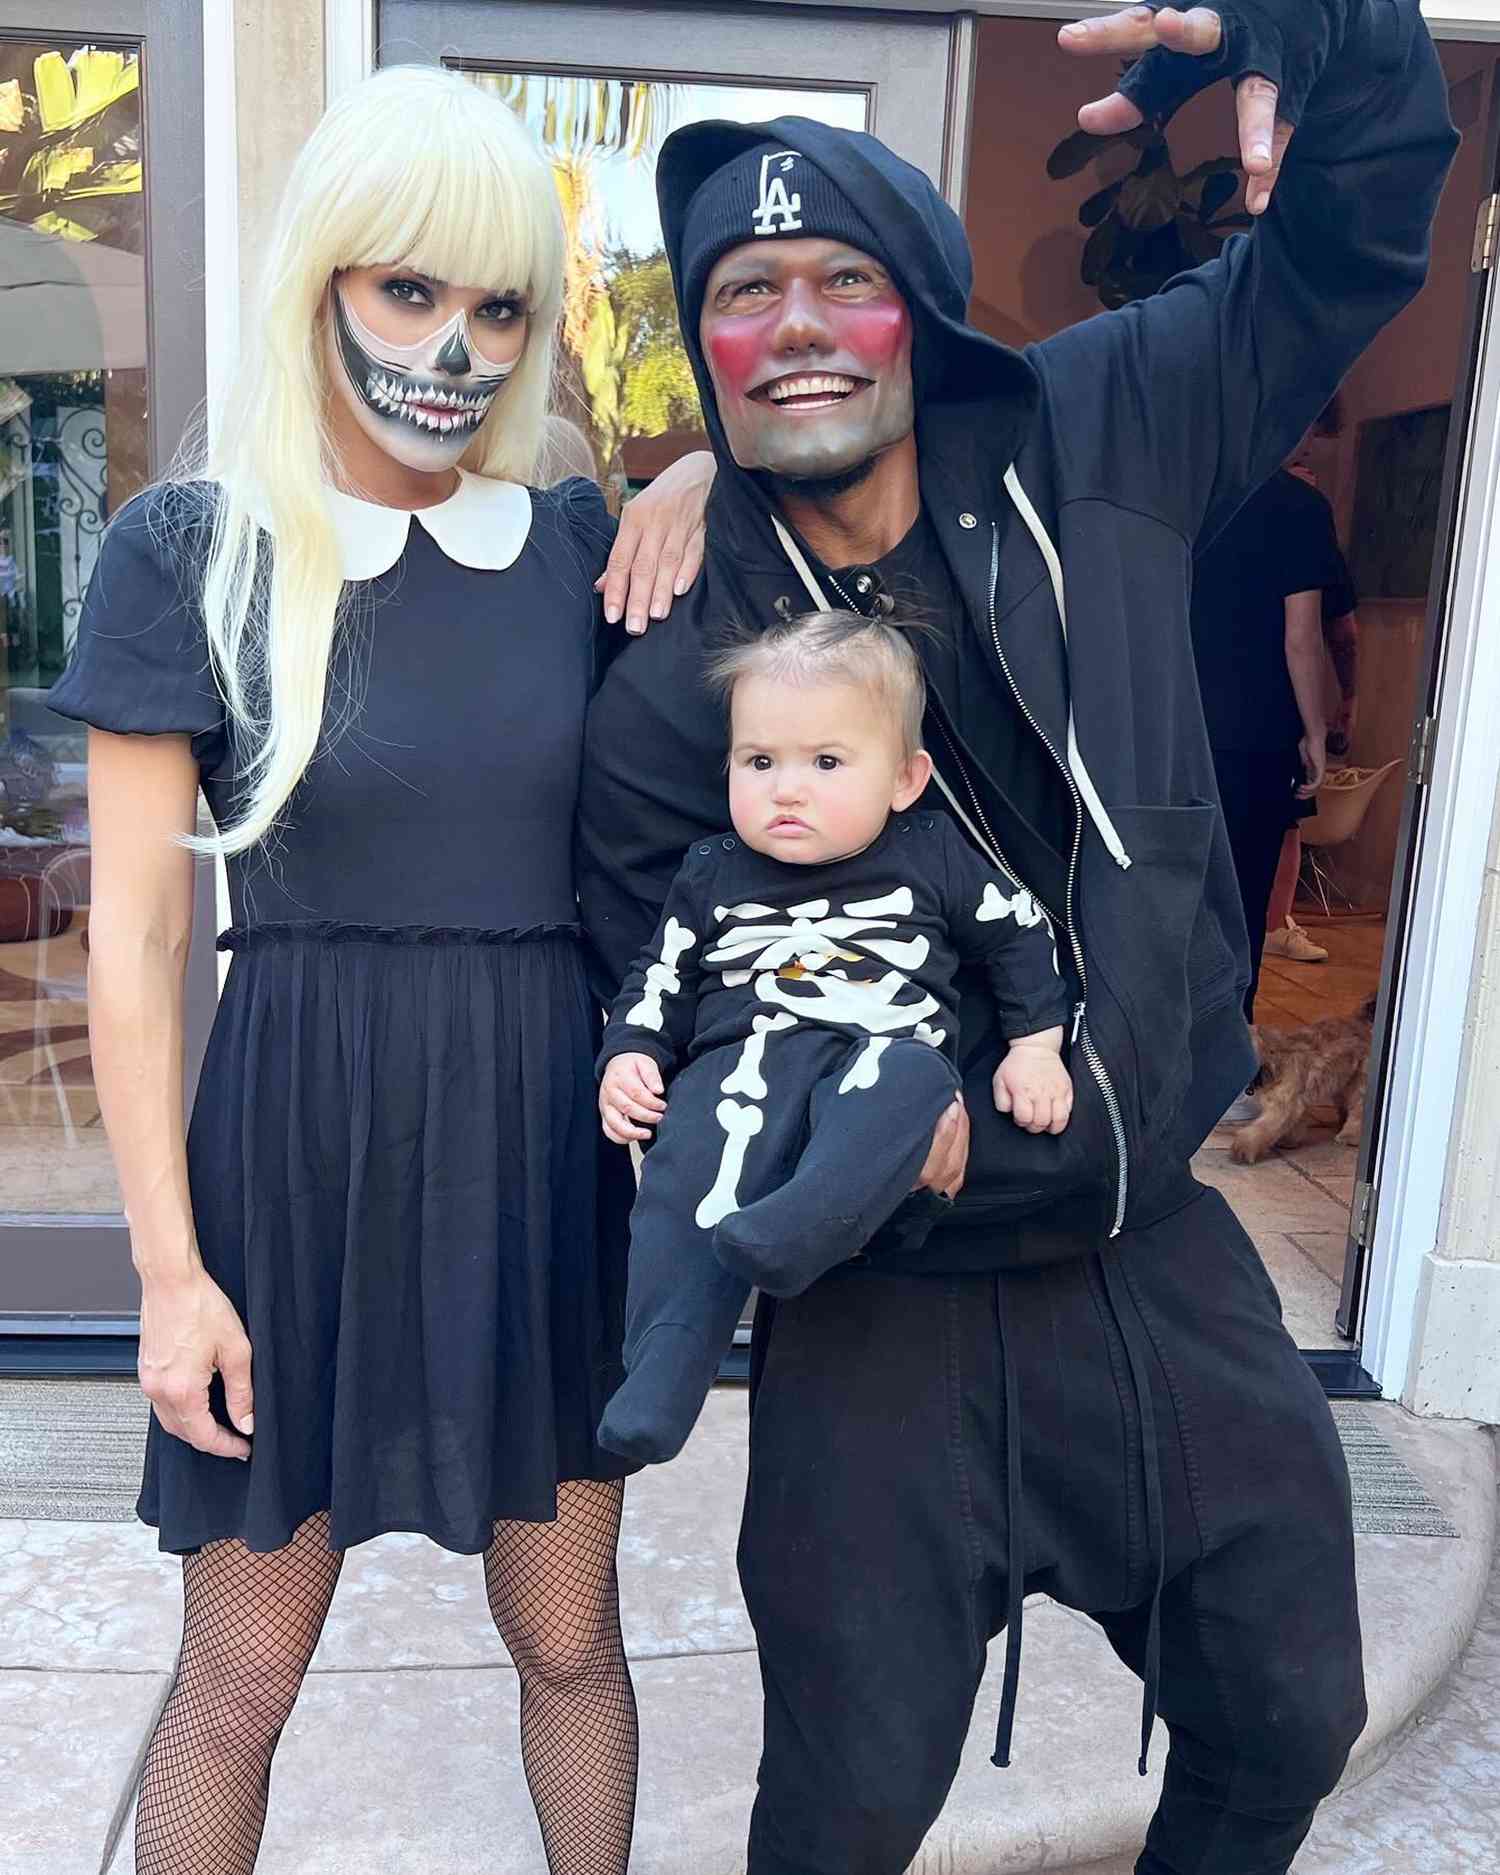 Shemar Moore and Jesiree Dizon with their daughter Frankie dressed up fro Halloween.